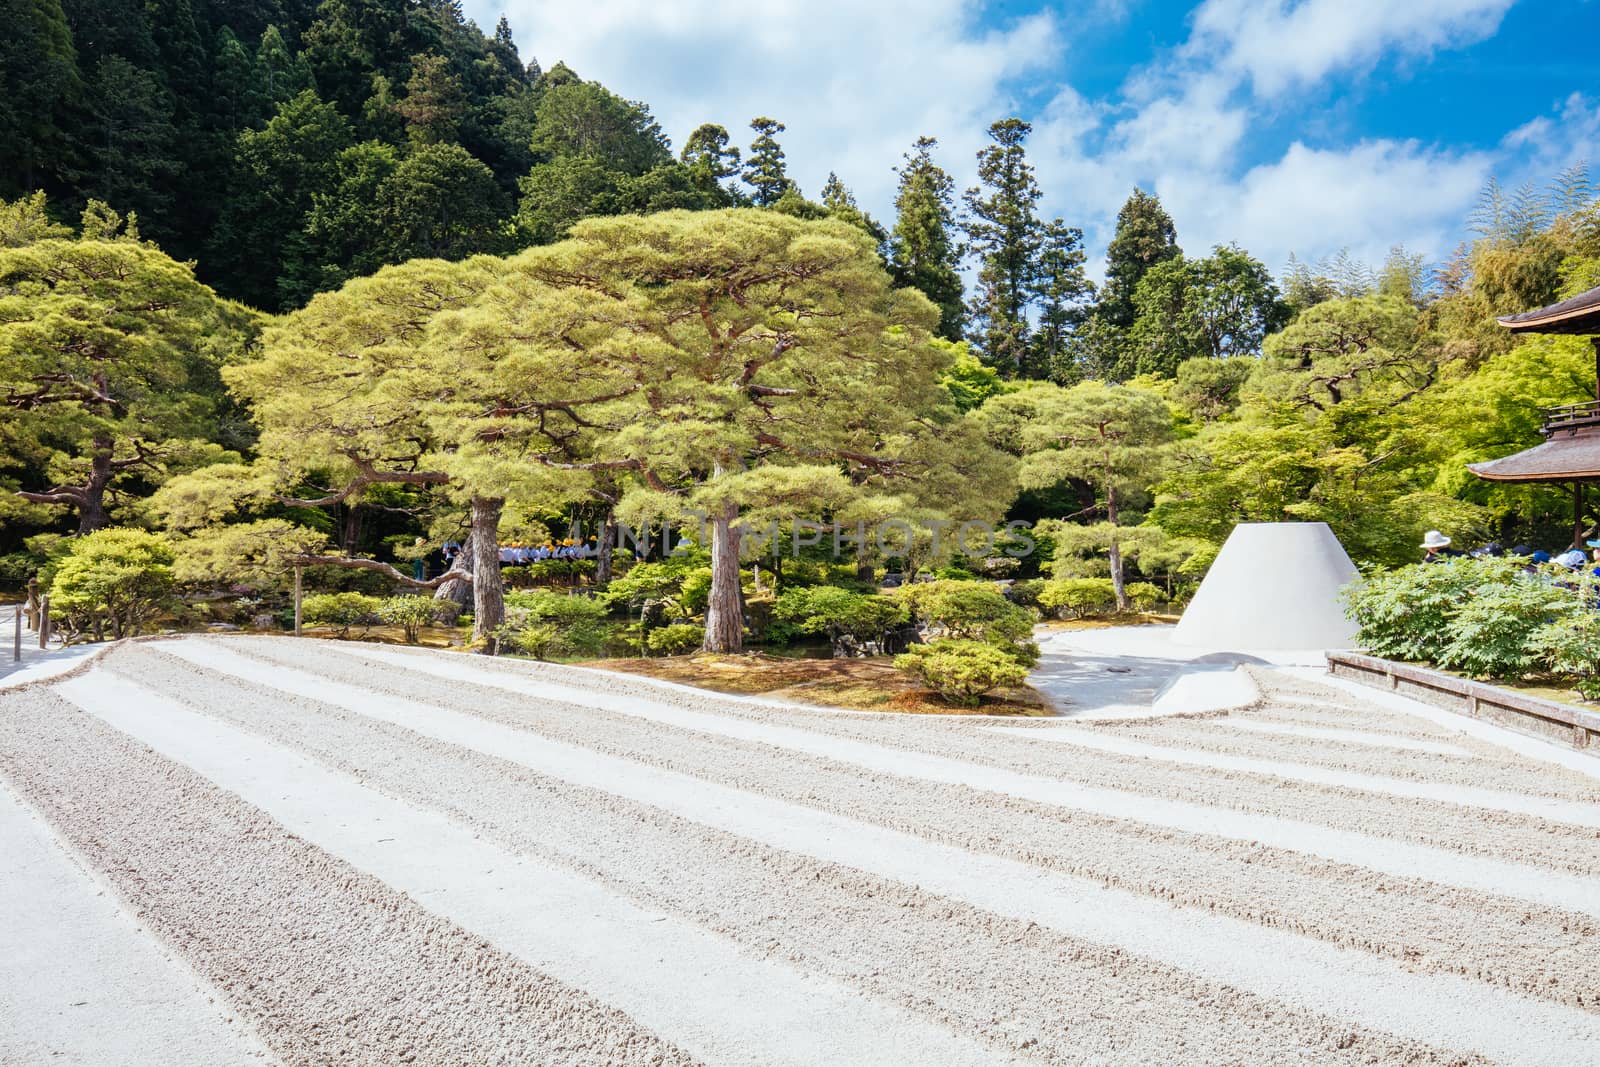 The stunning architecture and gardens at Silver Pavillion Ginkakuji temple in Kyoto, Japan